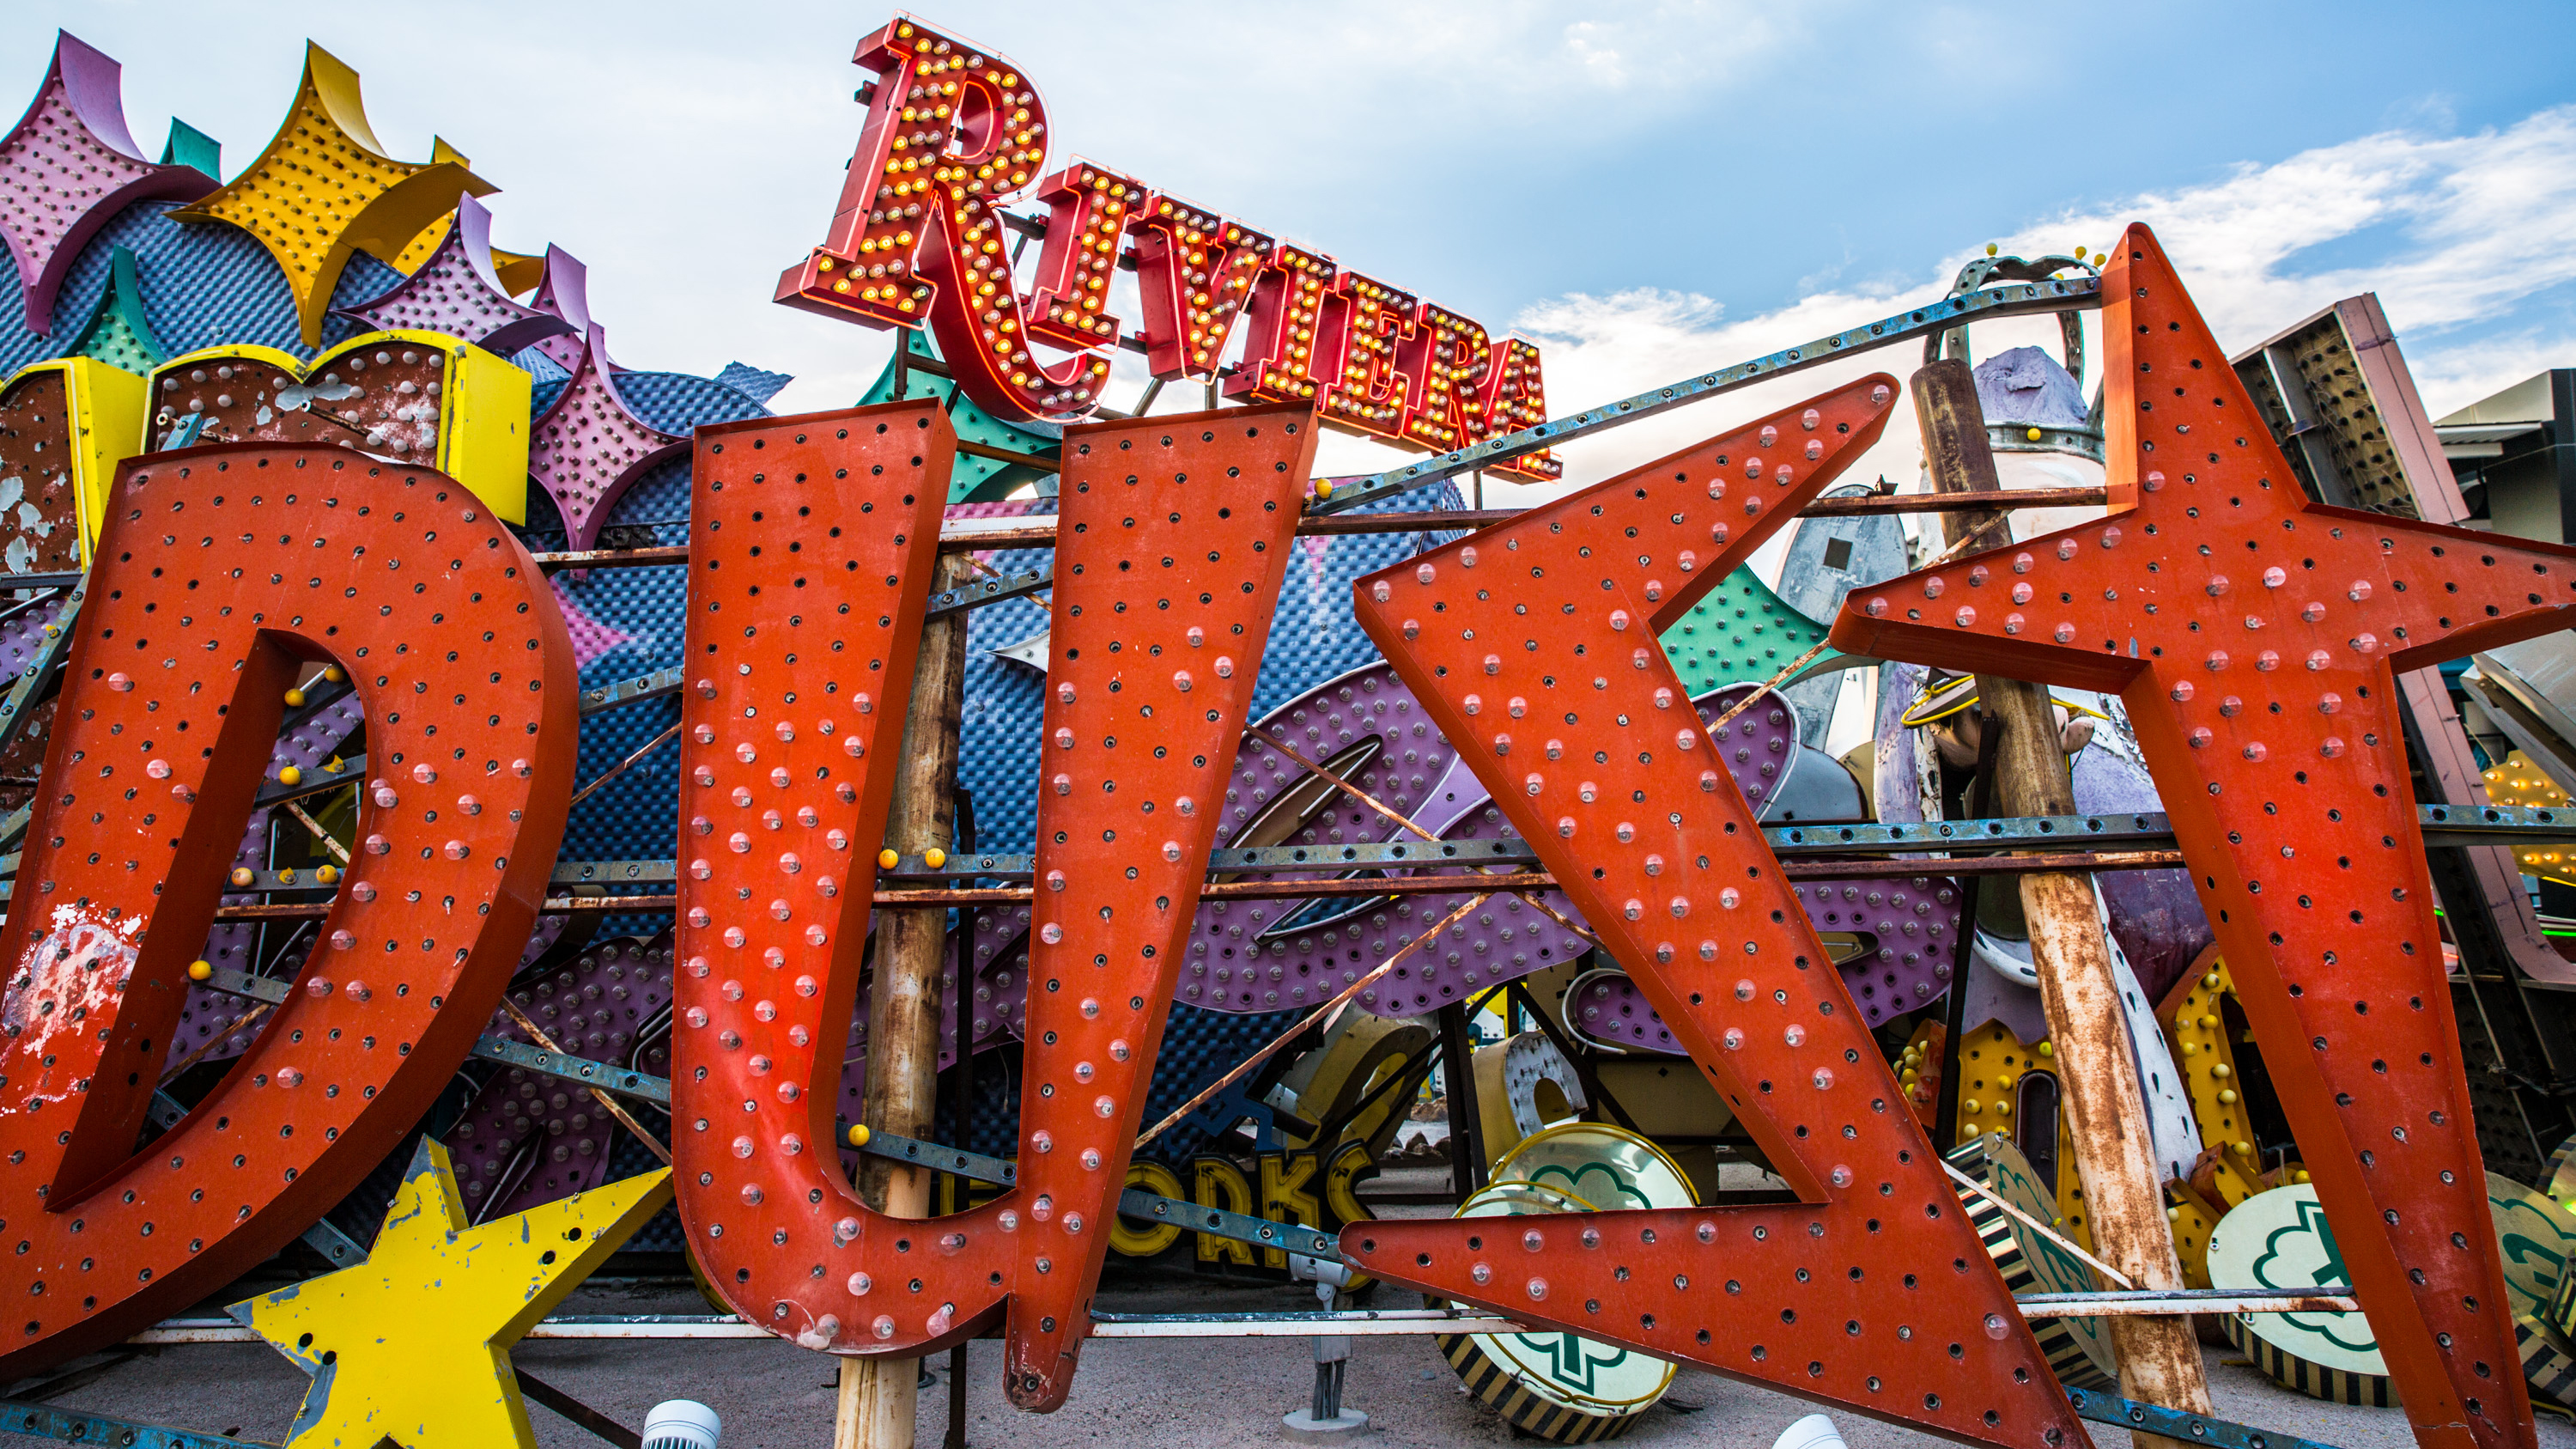 Las Vegas history shines again: Palms Casino restored sign lights up the  Neon Museum